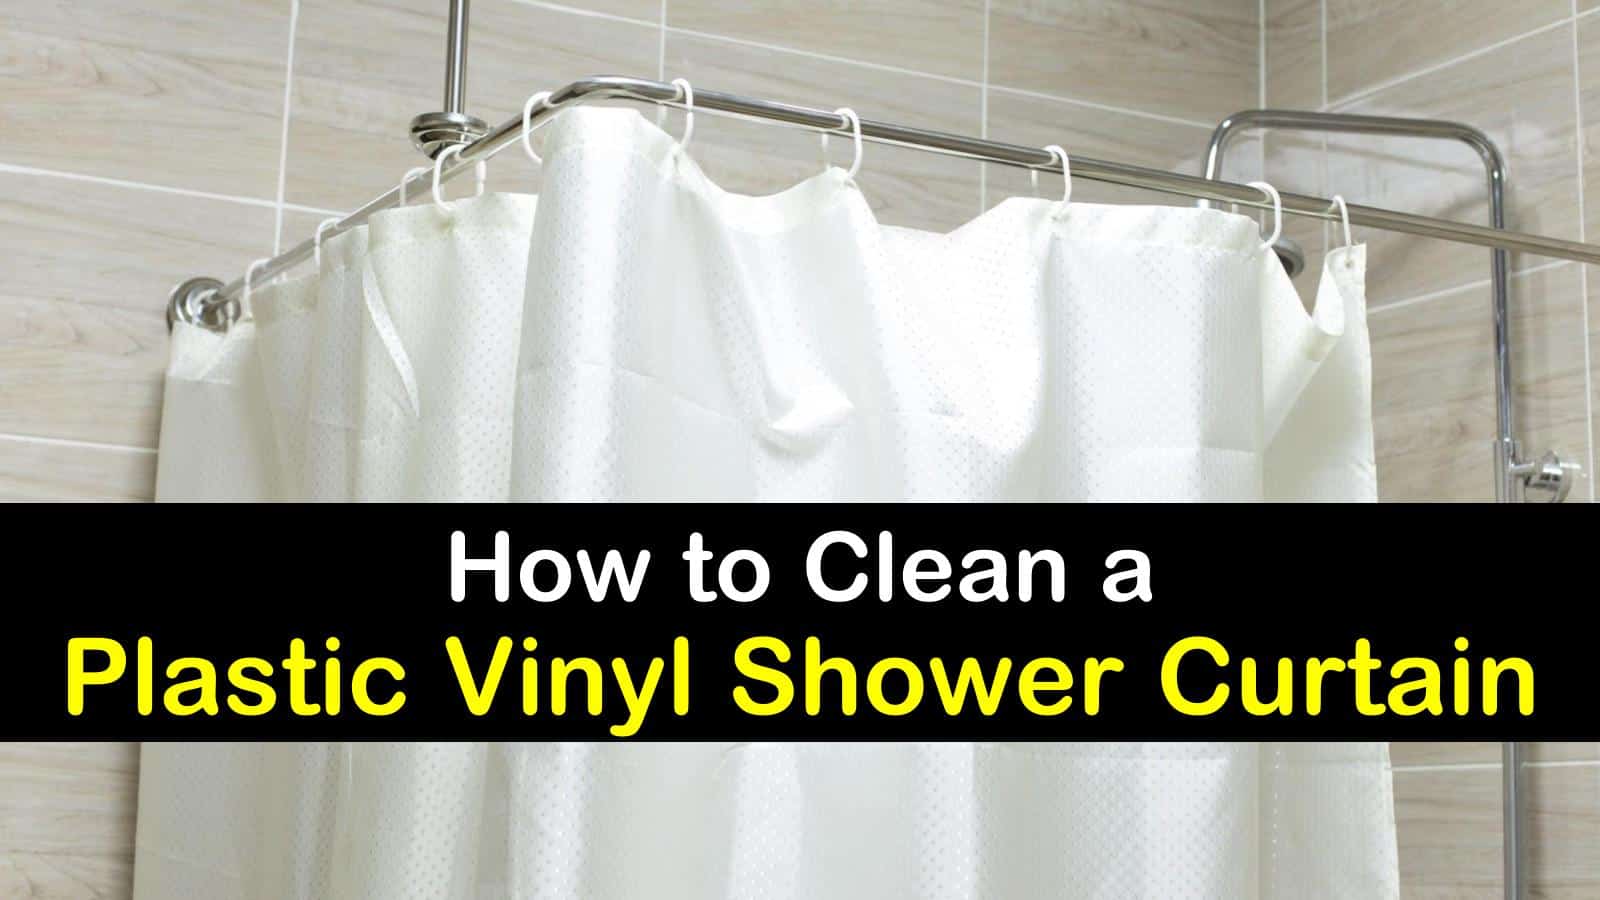 5 Excellent Ways To Clean A Shower Curtain, How To Clean A Plastic Shower Curtain Liner